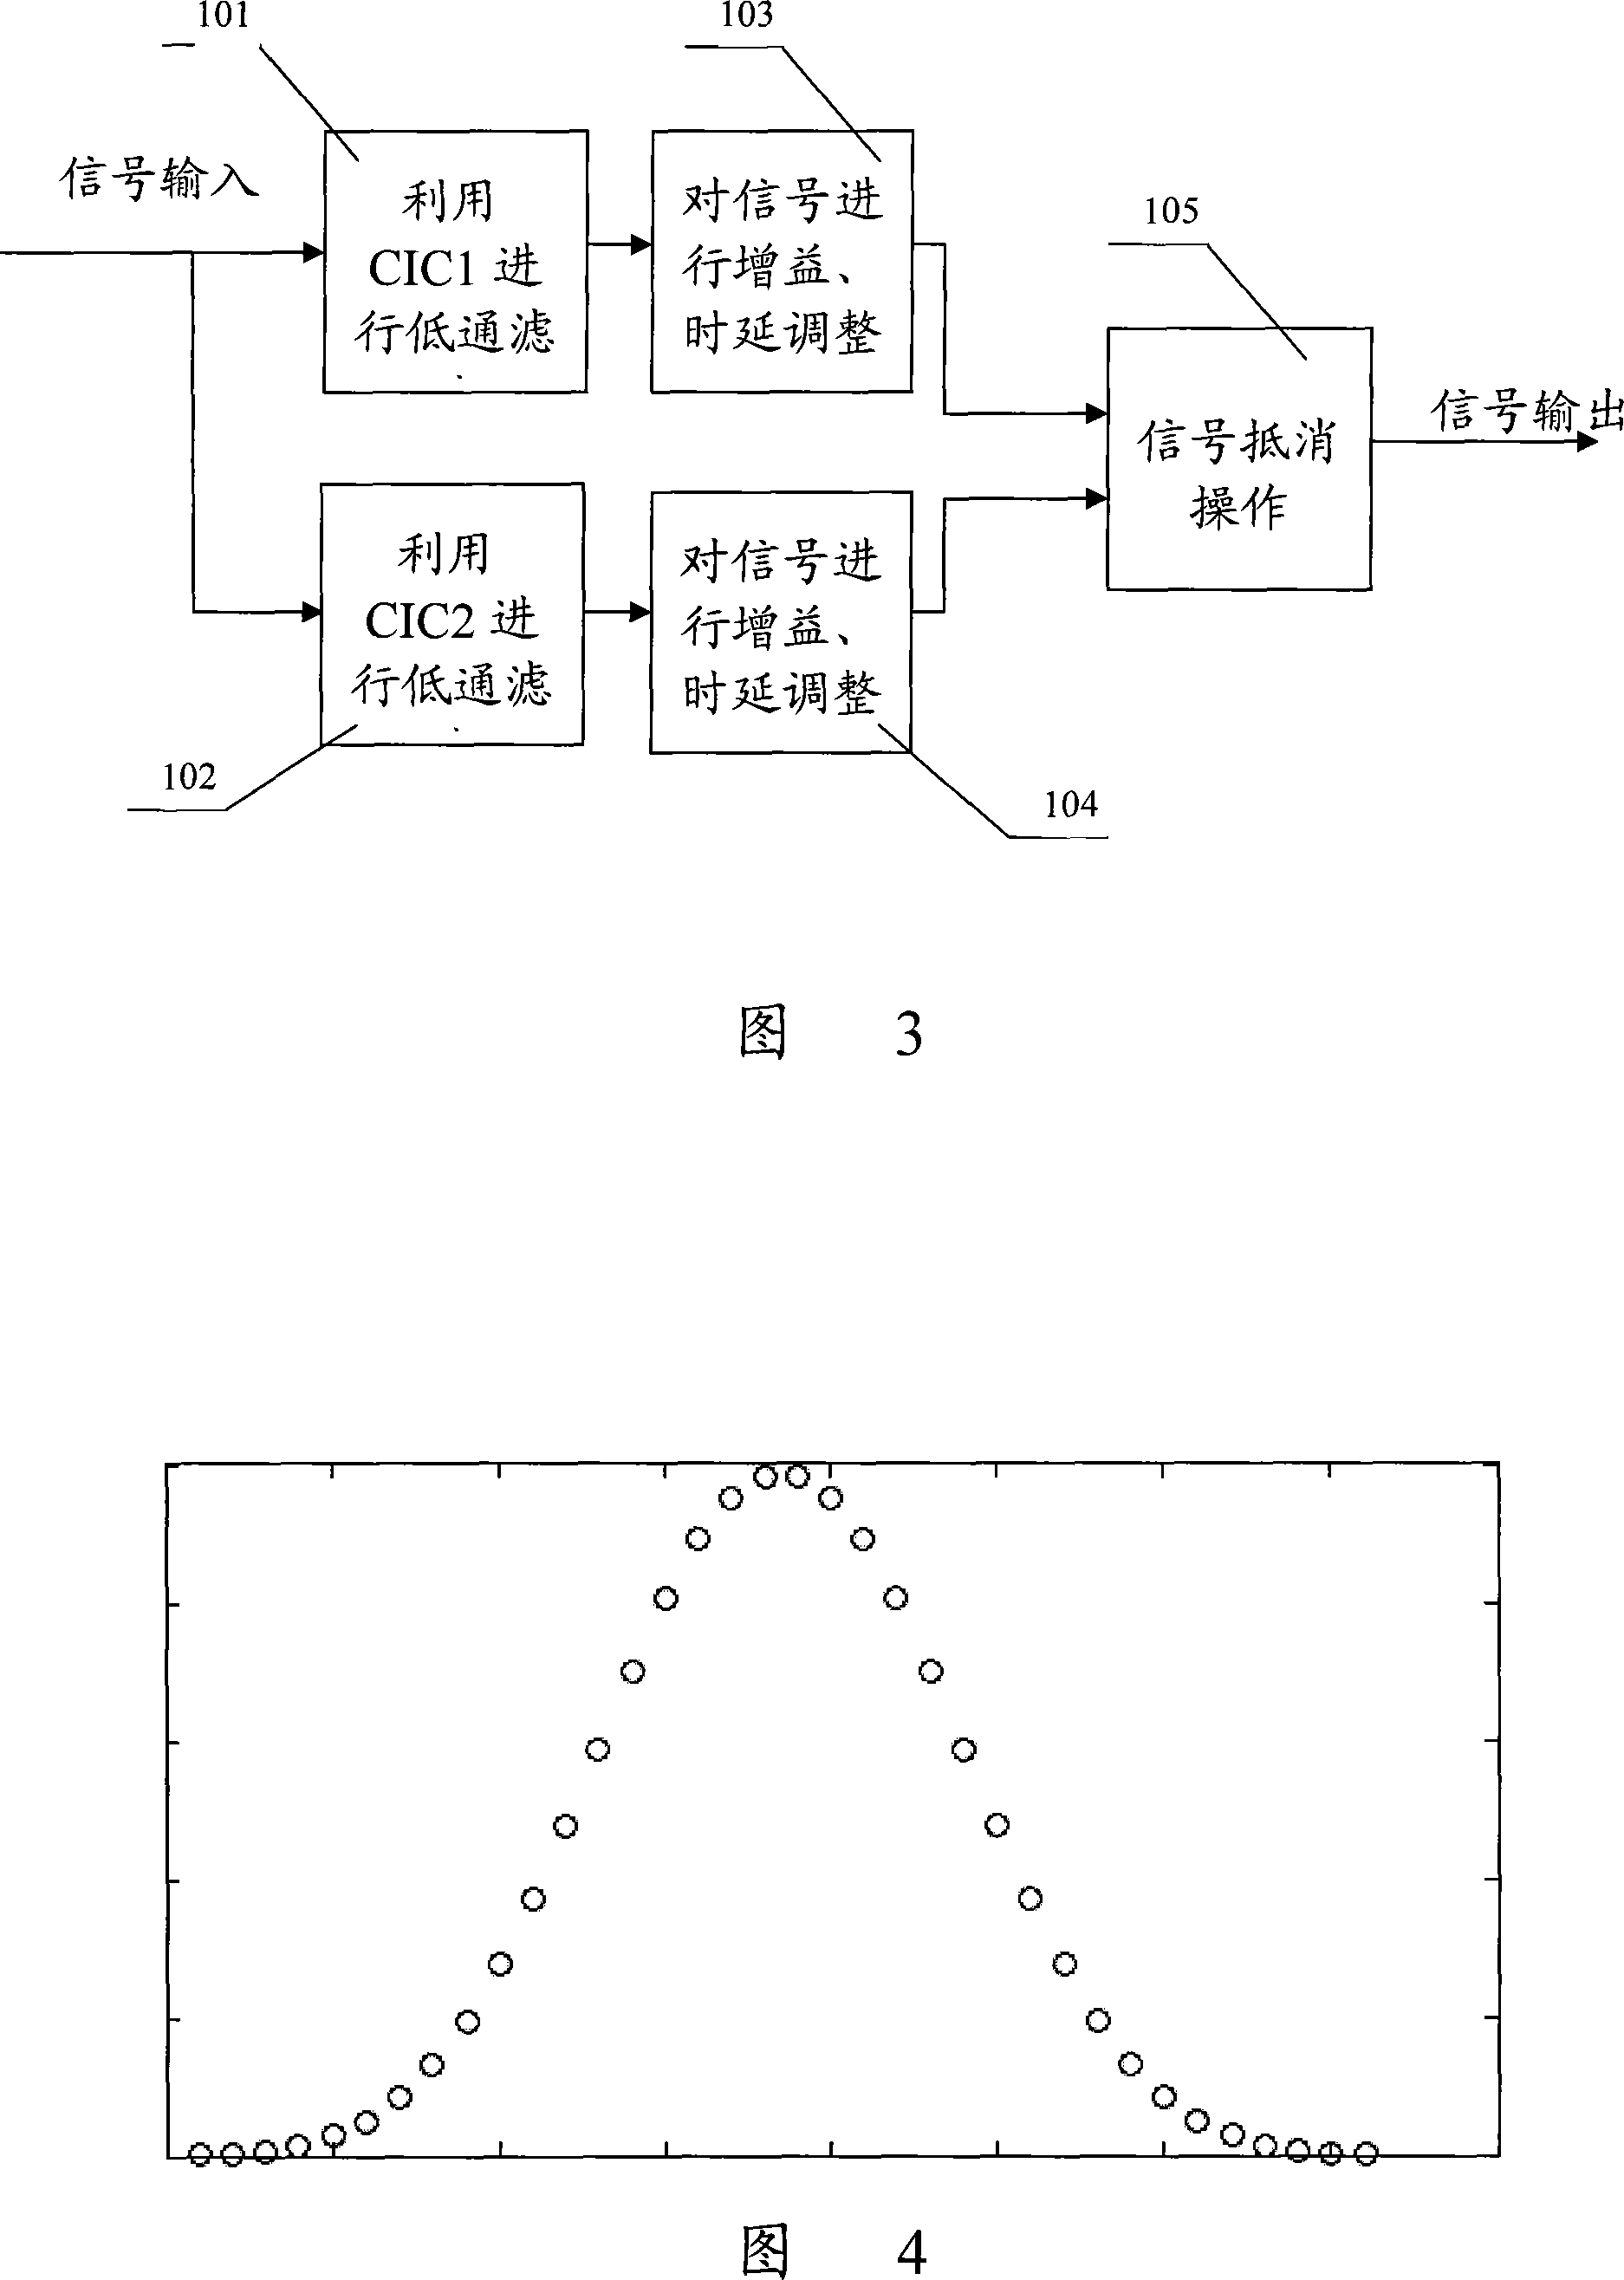 Method and device for implementing bandpass filtering using cascade integration comb filter